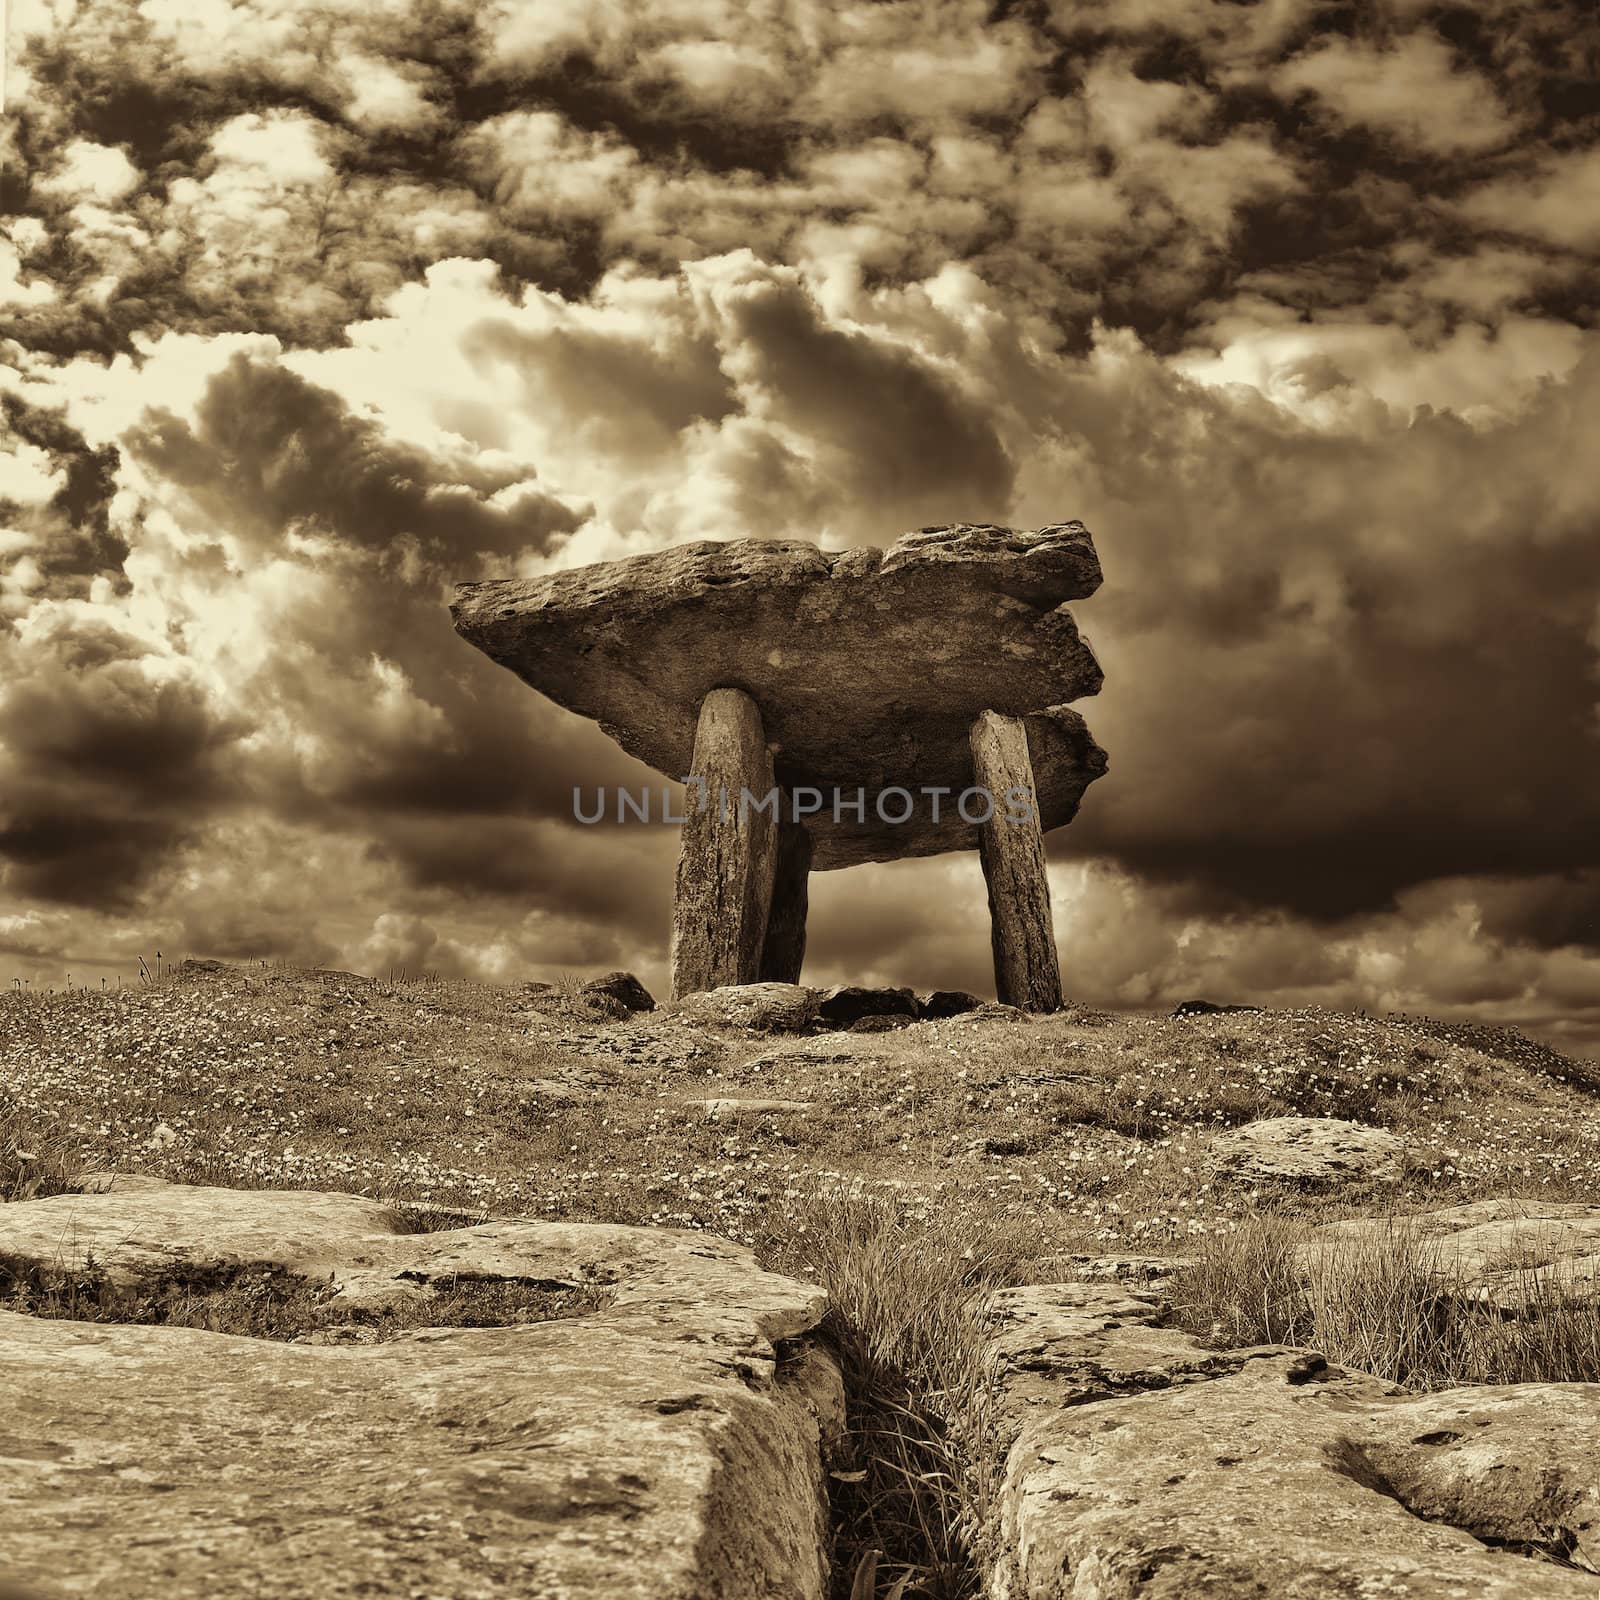 Poulnabrone dolmen, 5,000 year old portal tomb in the limestone Burren area of County Clare, Ireland